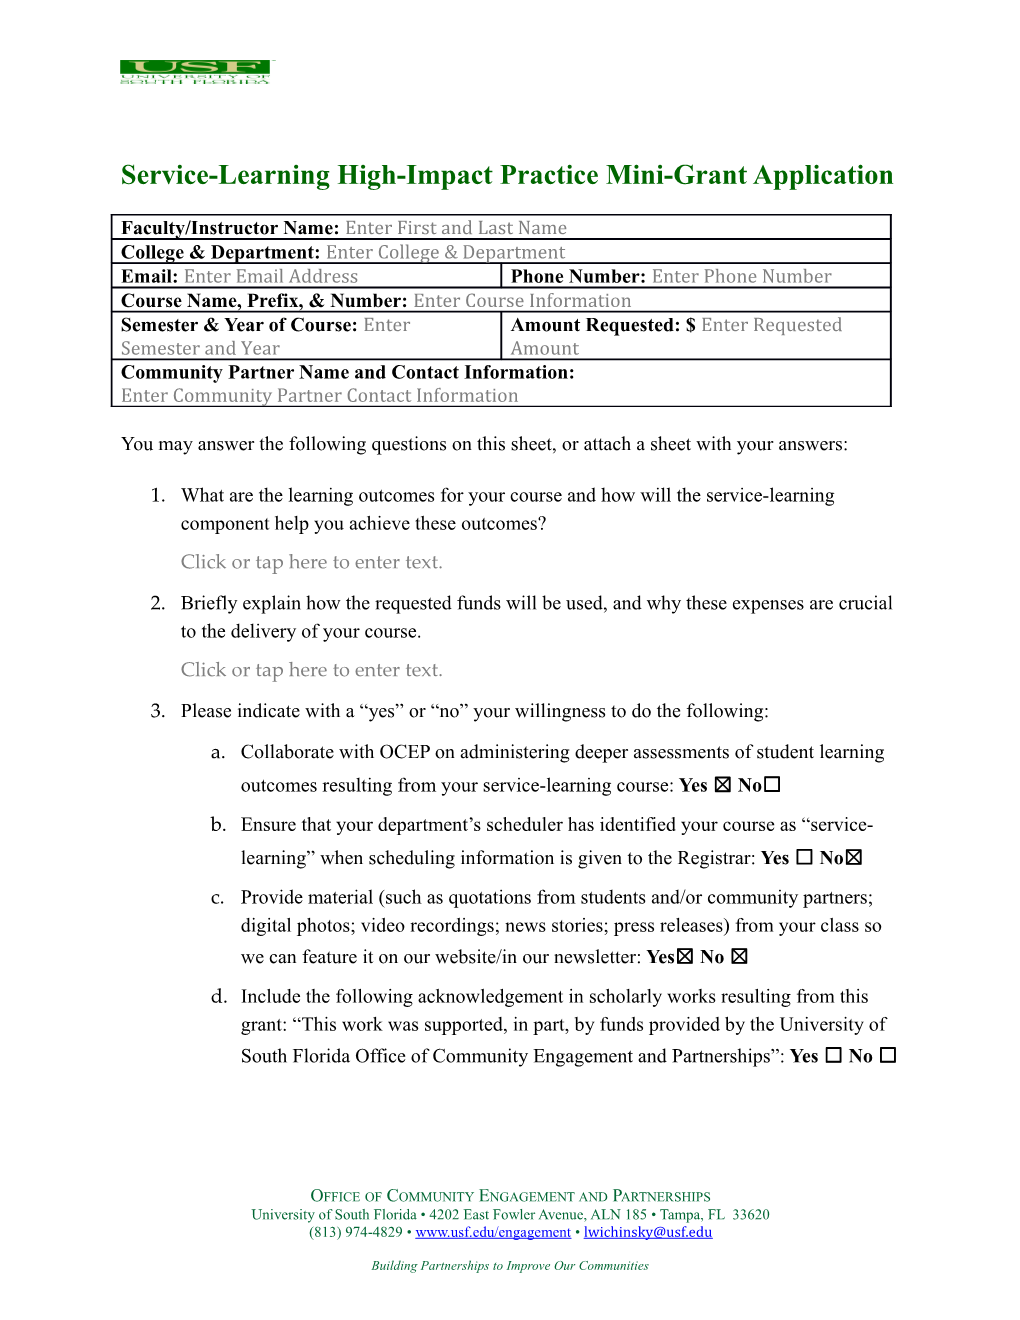 Service-Learning High-Impact Practice Mini-Grant Application